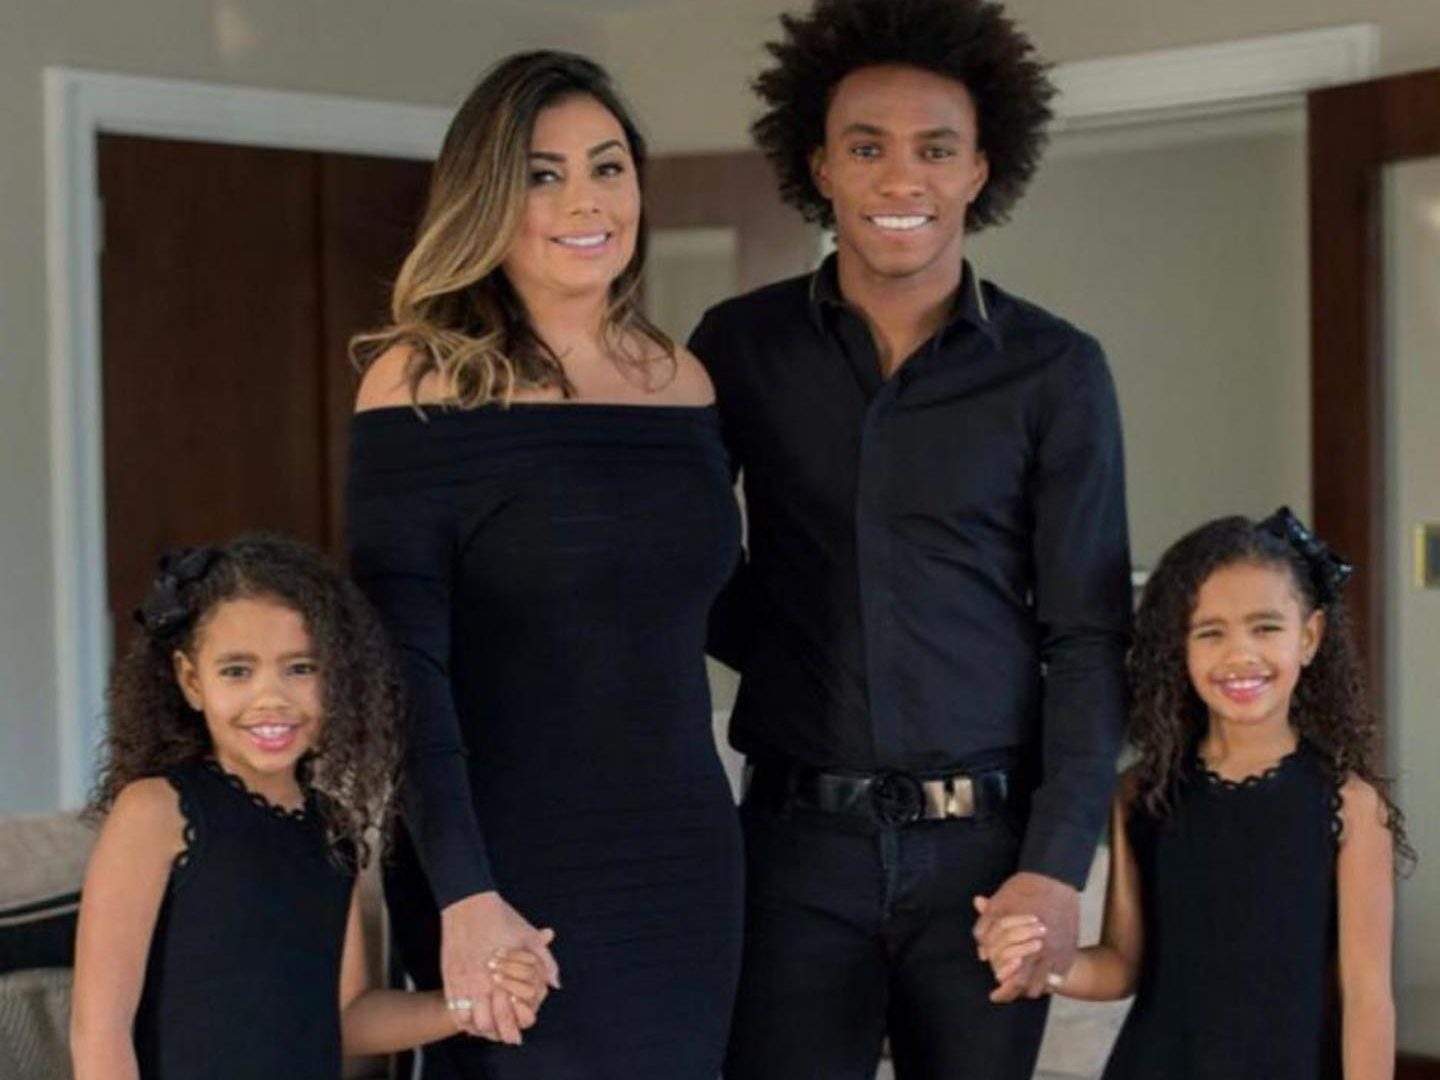 Willian with his wife and children. (Credit: Instagram)